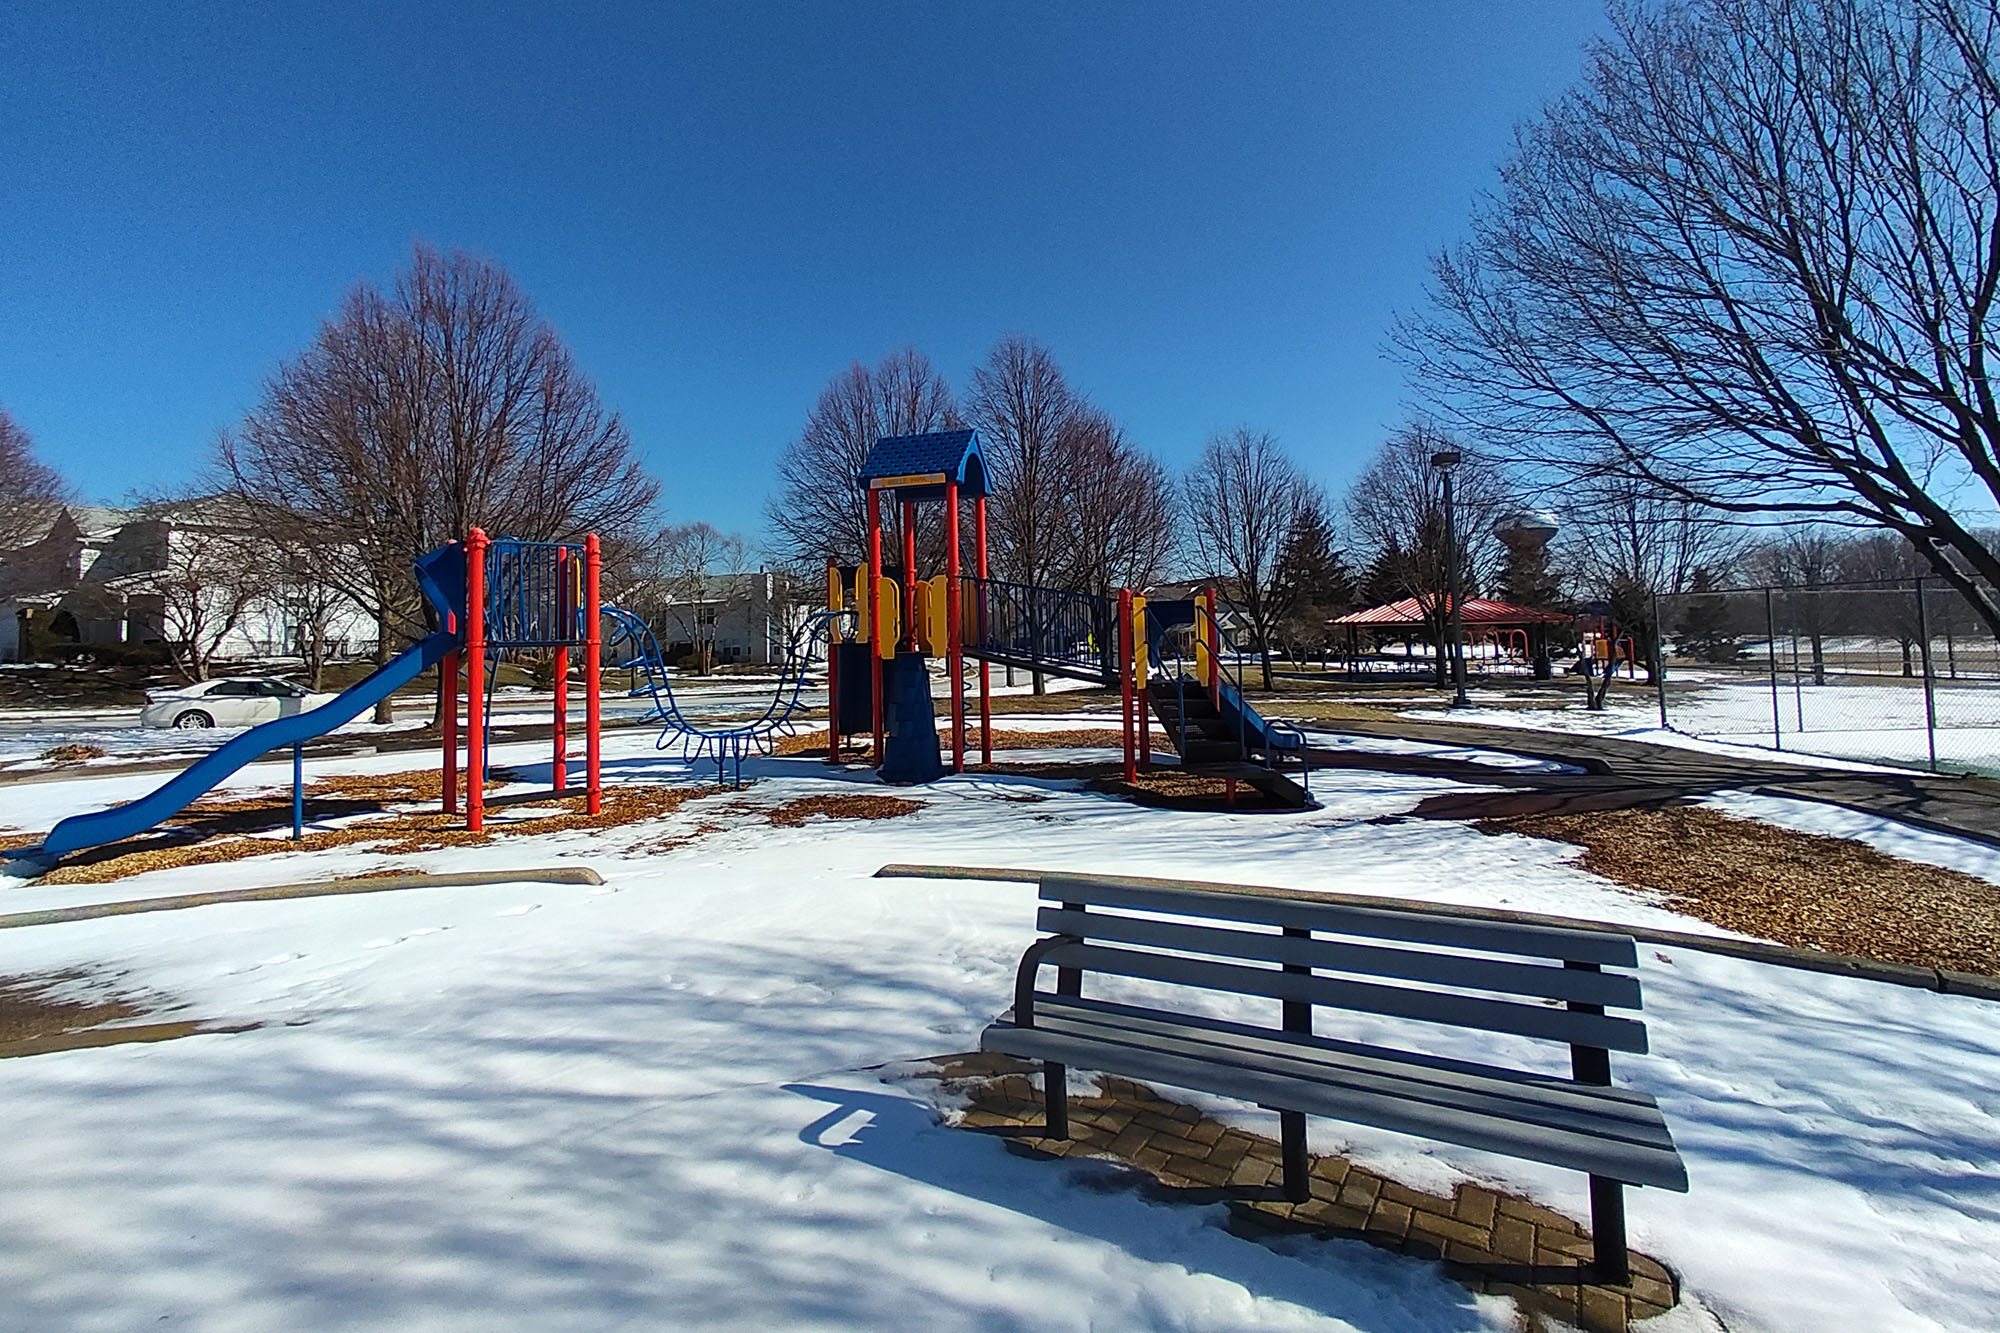 This is a photo sample of a park taken with the ultrawide camera of the RedMagic 7.